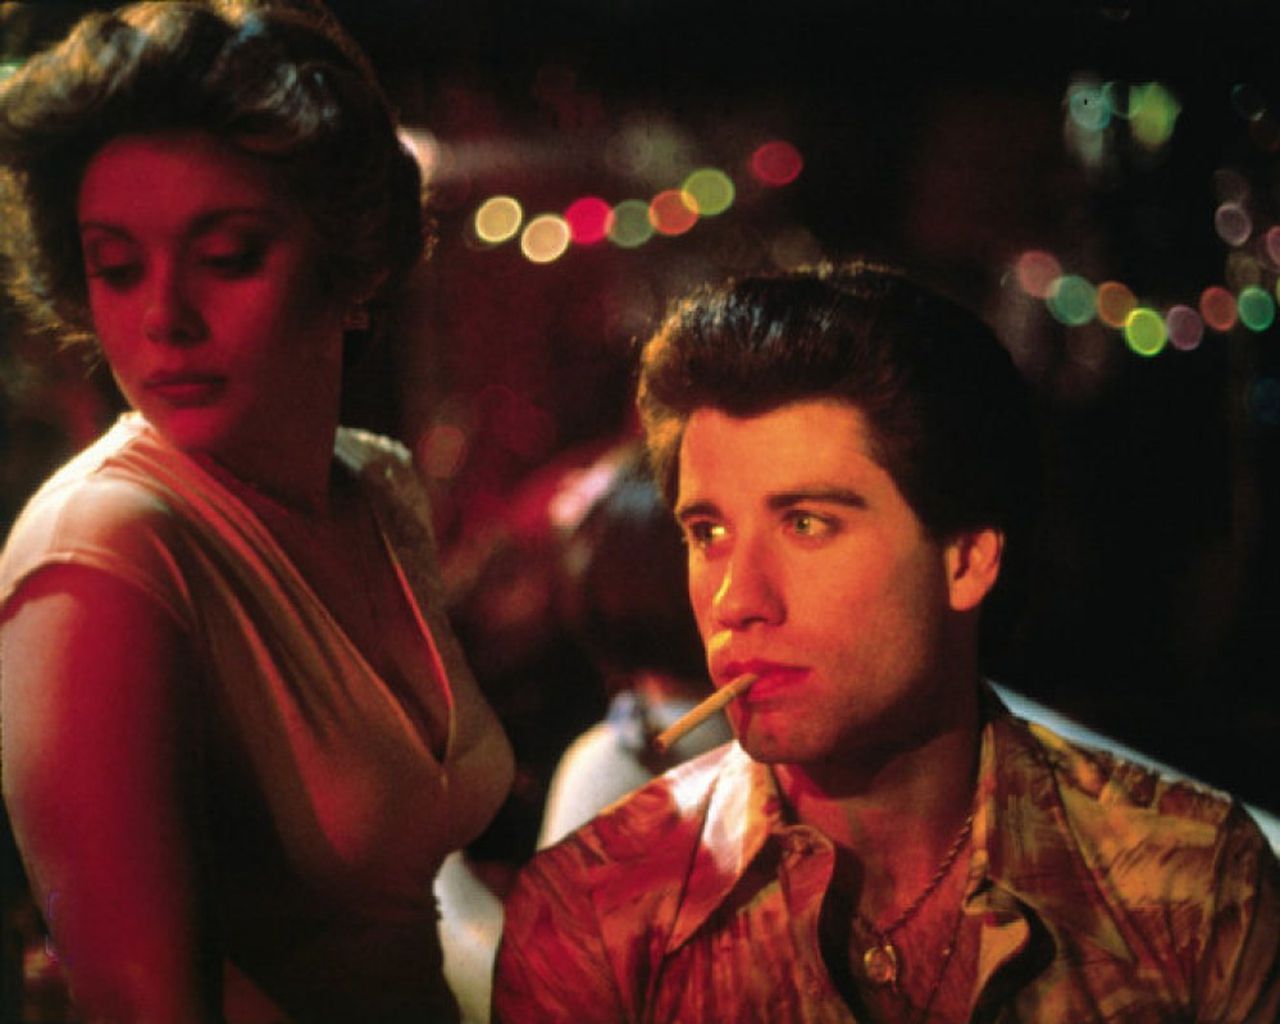 That time Saturday Night Fever disco danced into our hearts 40 years ago